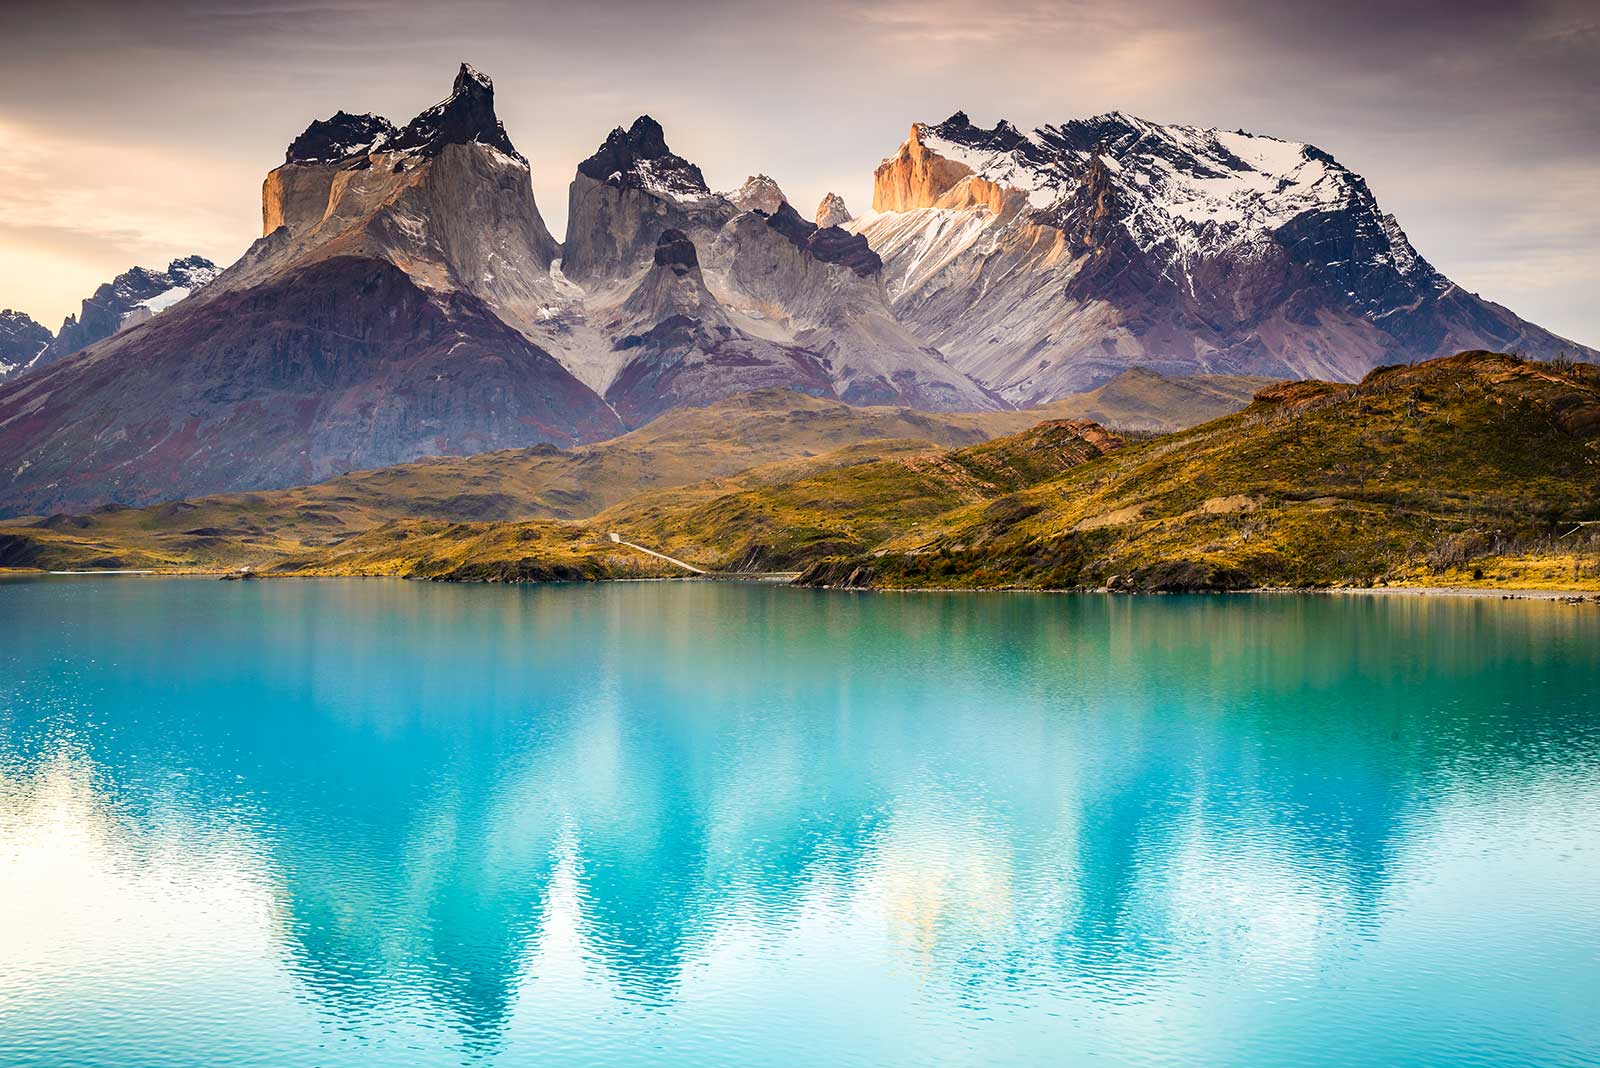 Torres del Paine, in the Southern Patagonian Ice Field